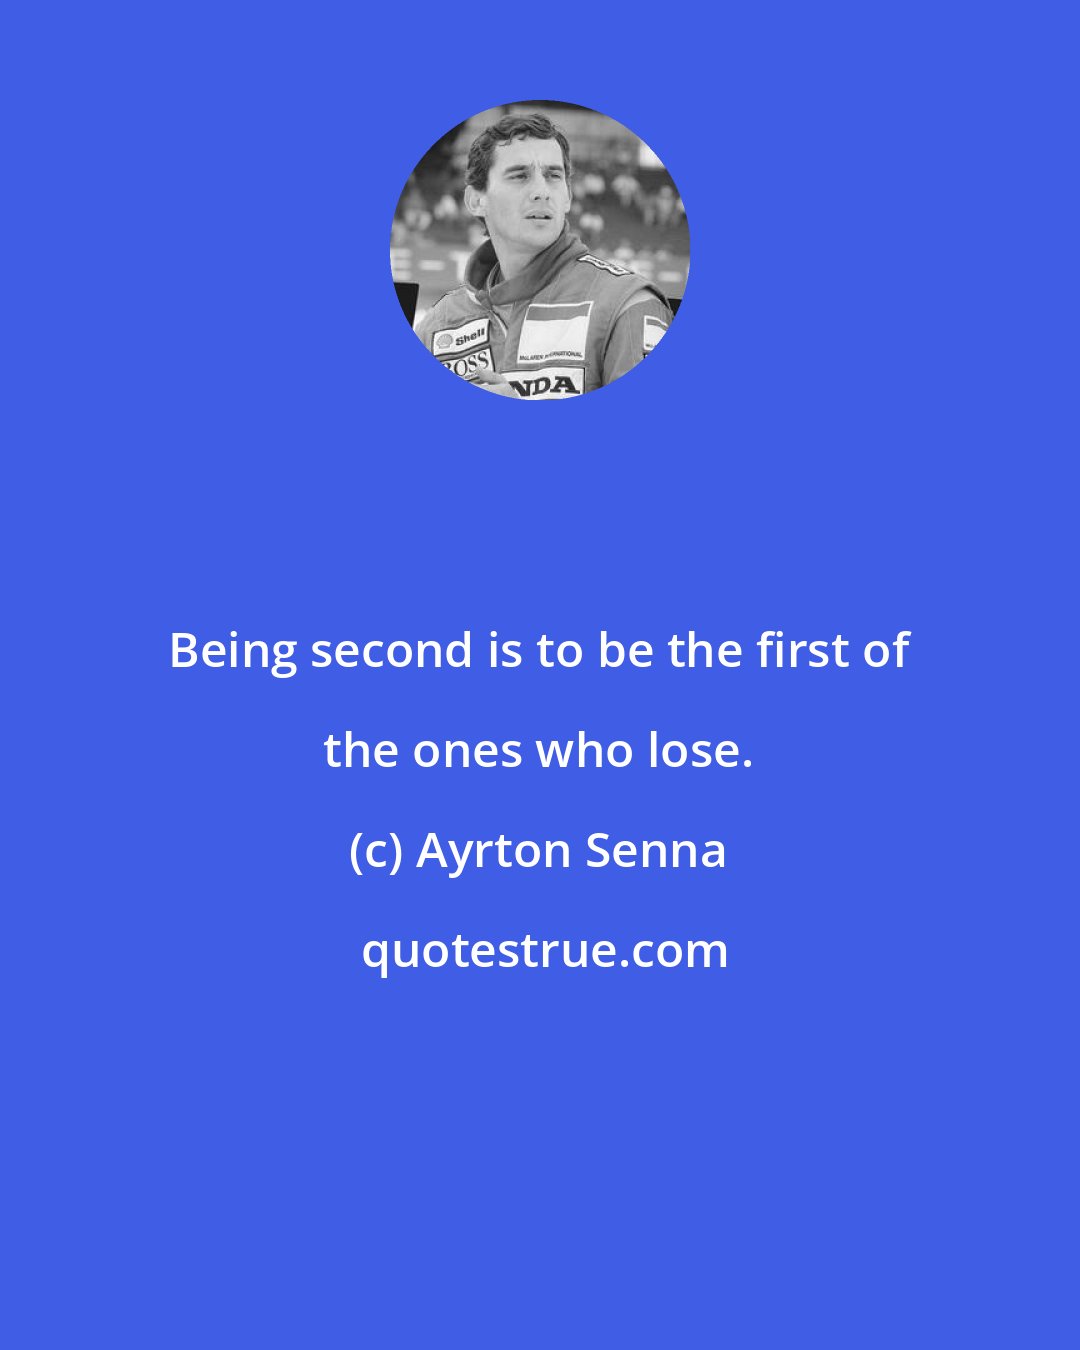 Ayrton Senna: Being second is to be the first of the ones who lose.